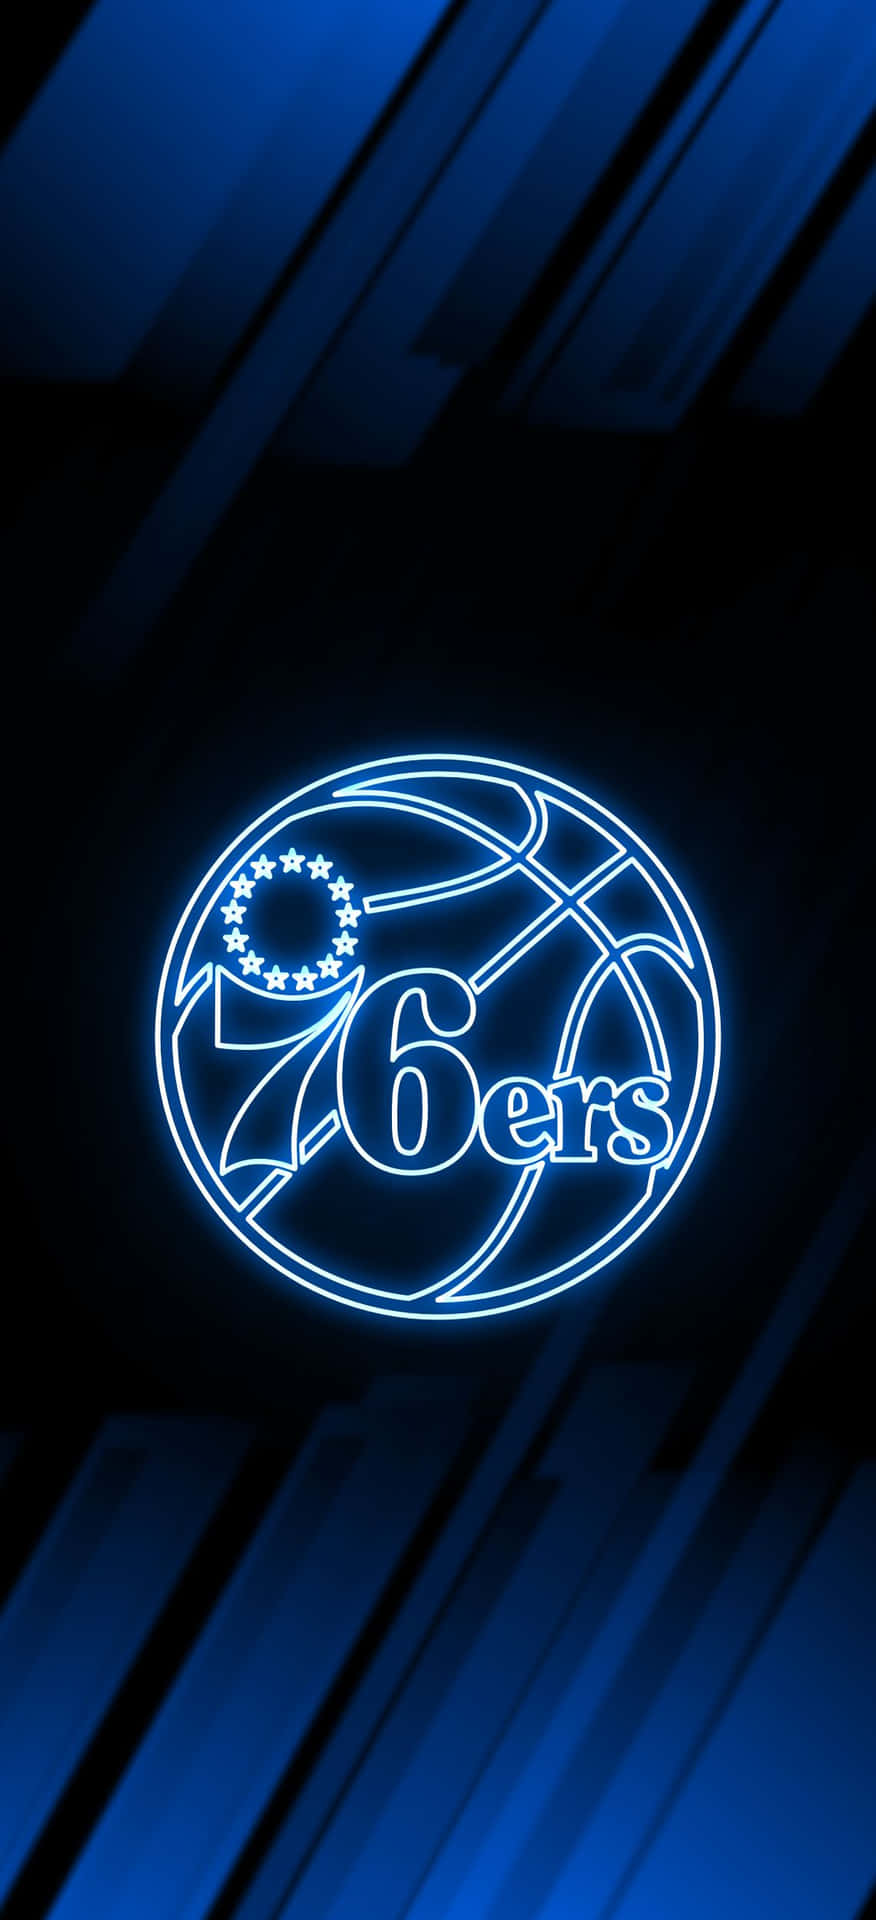 Free download Download Sixers Mobile Wallpapers Philadelphia 76ers  1080x1920 for your Desktop Mobile  Tablet  Explore 29 76Ers  Background  76ers Wallpaper Philadelphia 76ers Wallpaper 76ers Desktop  Wallpaper